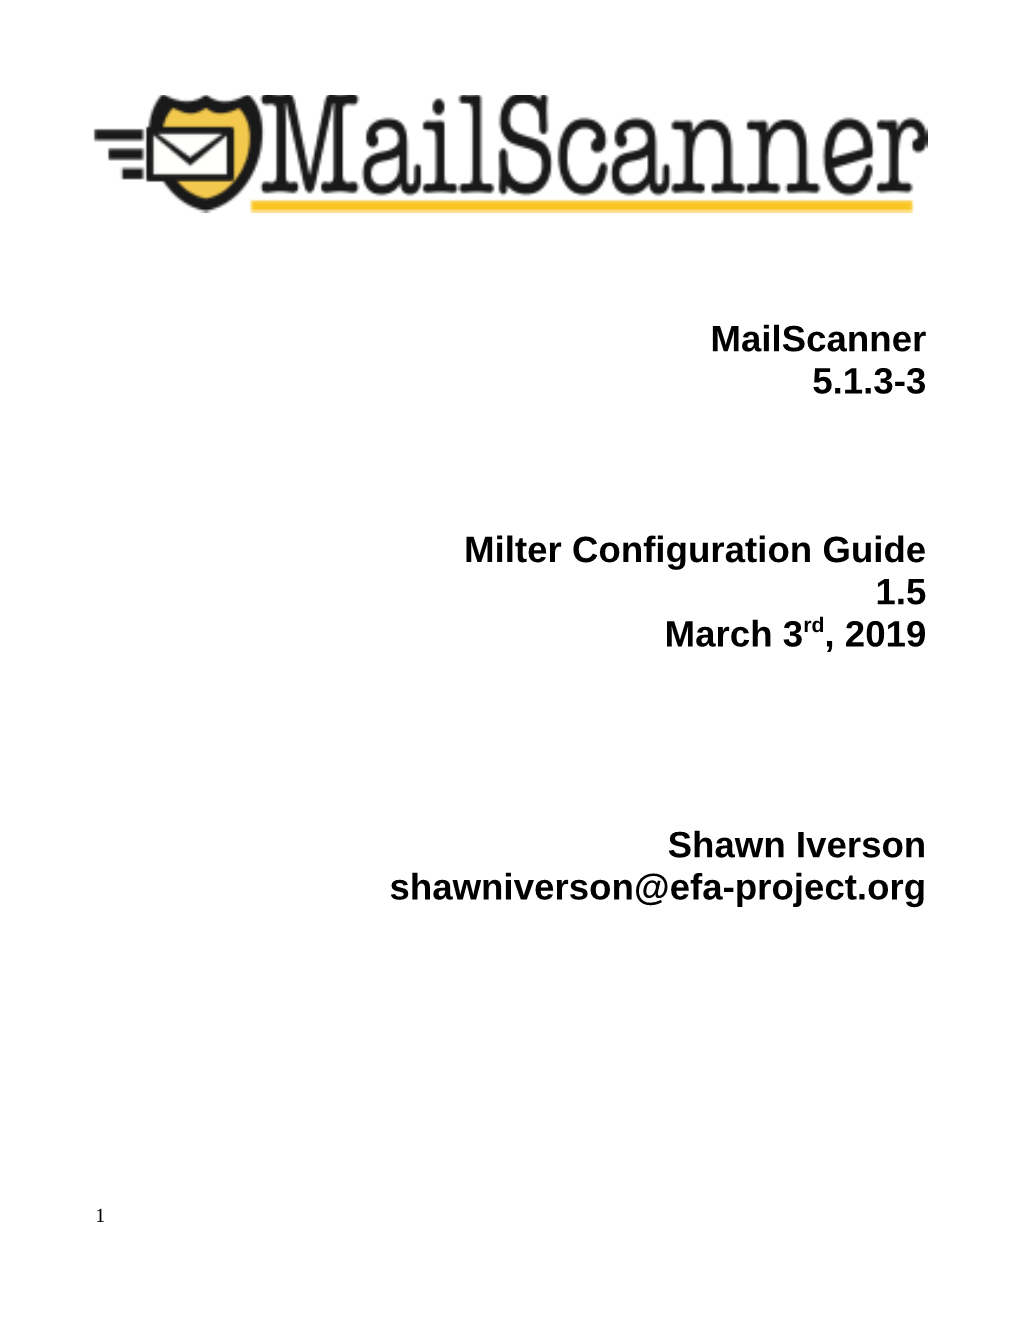 Mailscanner 5.1.3-3 Milter Configuration Guide 1.5 March 3Rd